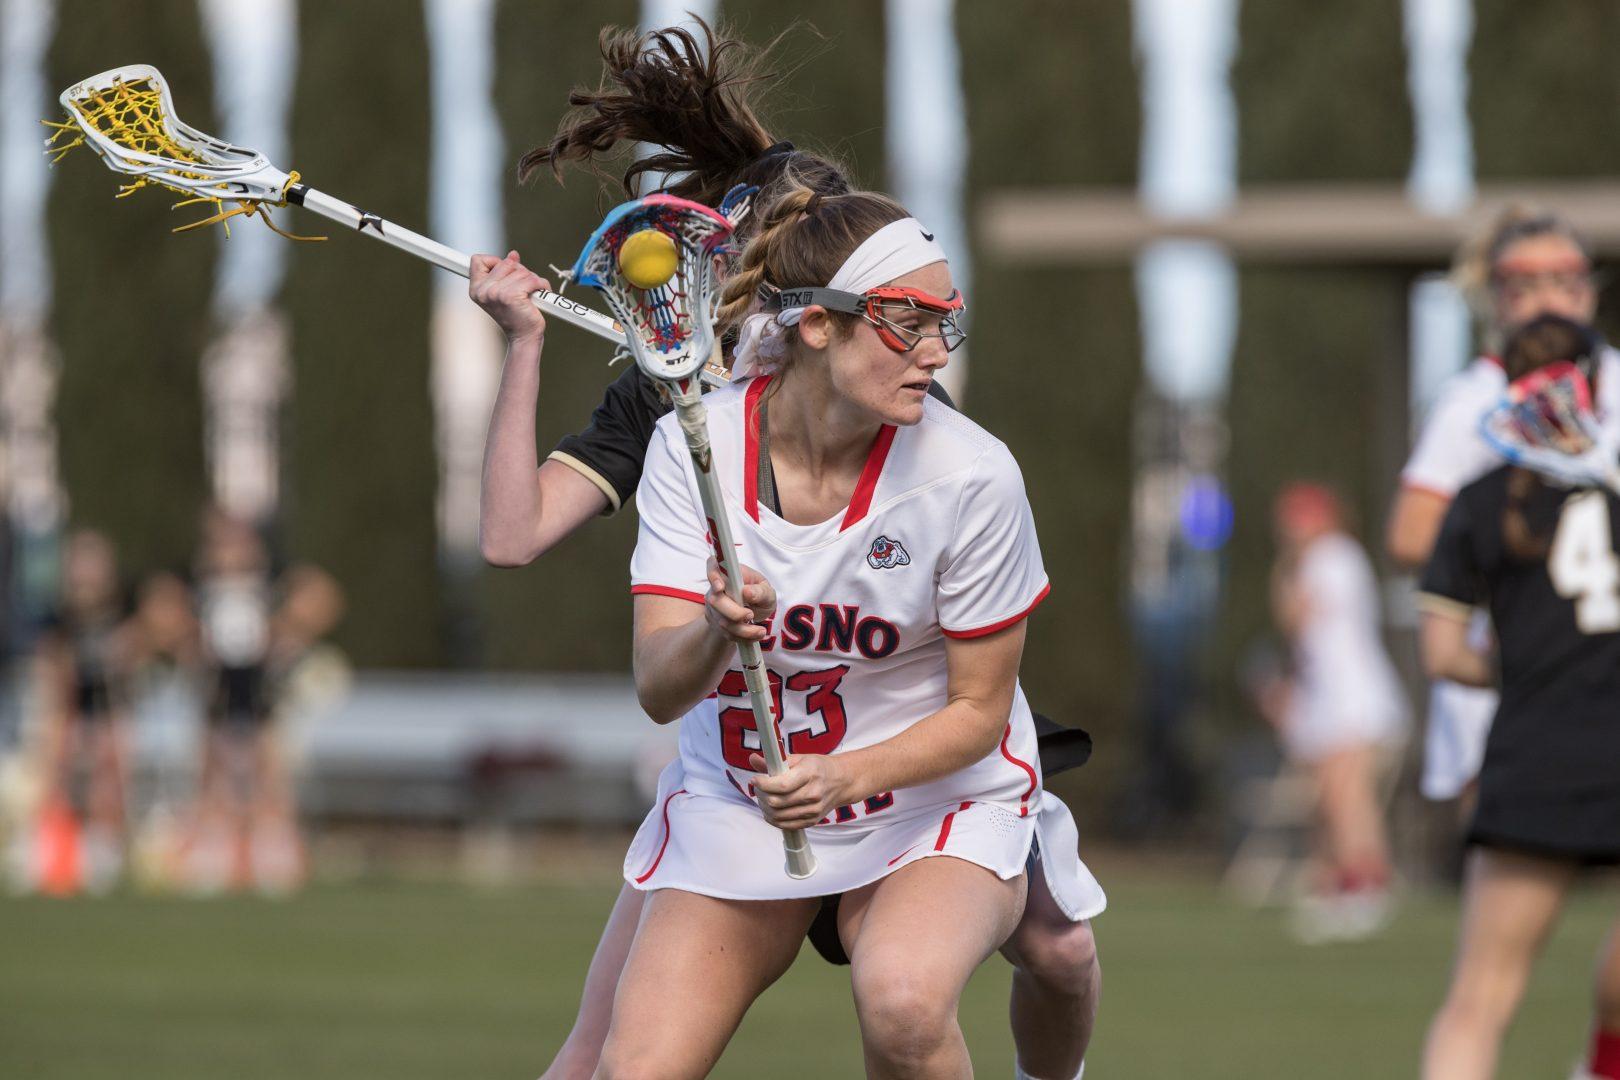 Junior+Sarah+Bloise+leads+the+Fresno+State+lacrosse+team+with+39+goals+and+20+assists.+The+team+heads+to+UC+Davis+for+its+last+regular+season+game+on+April+21%2C+2018.+%28Fresno+State+Athletics%29+